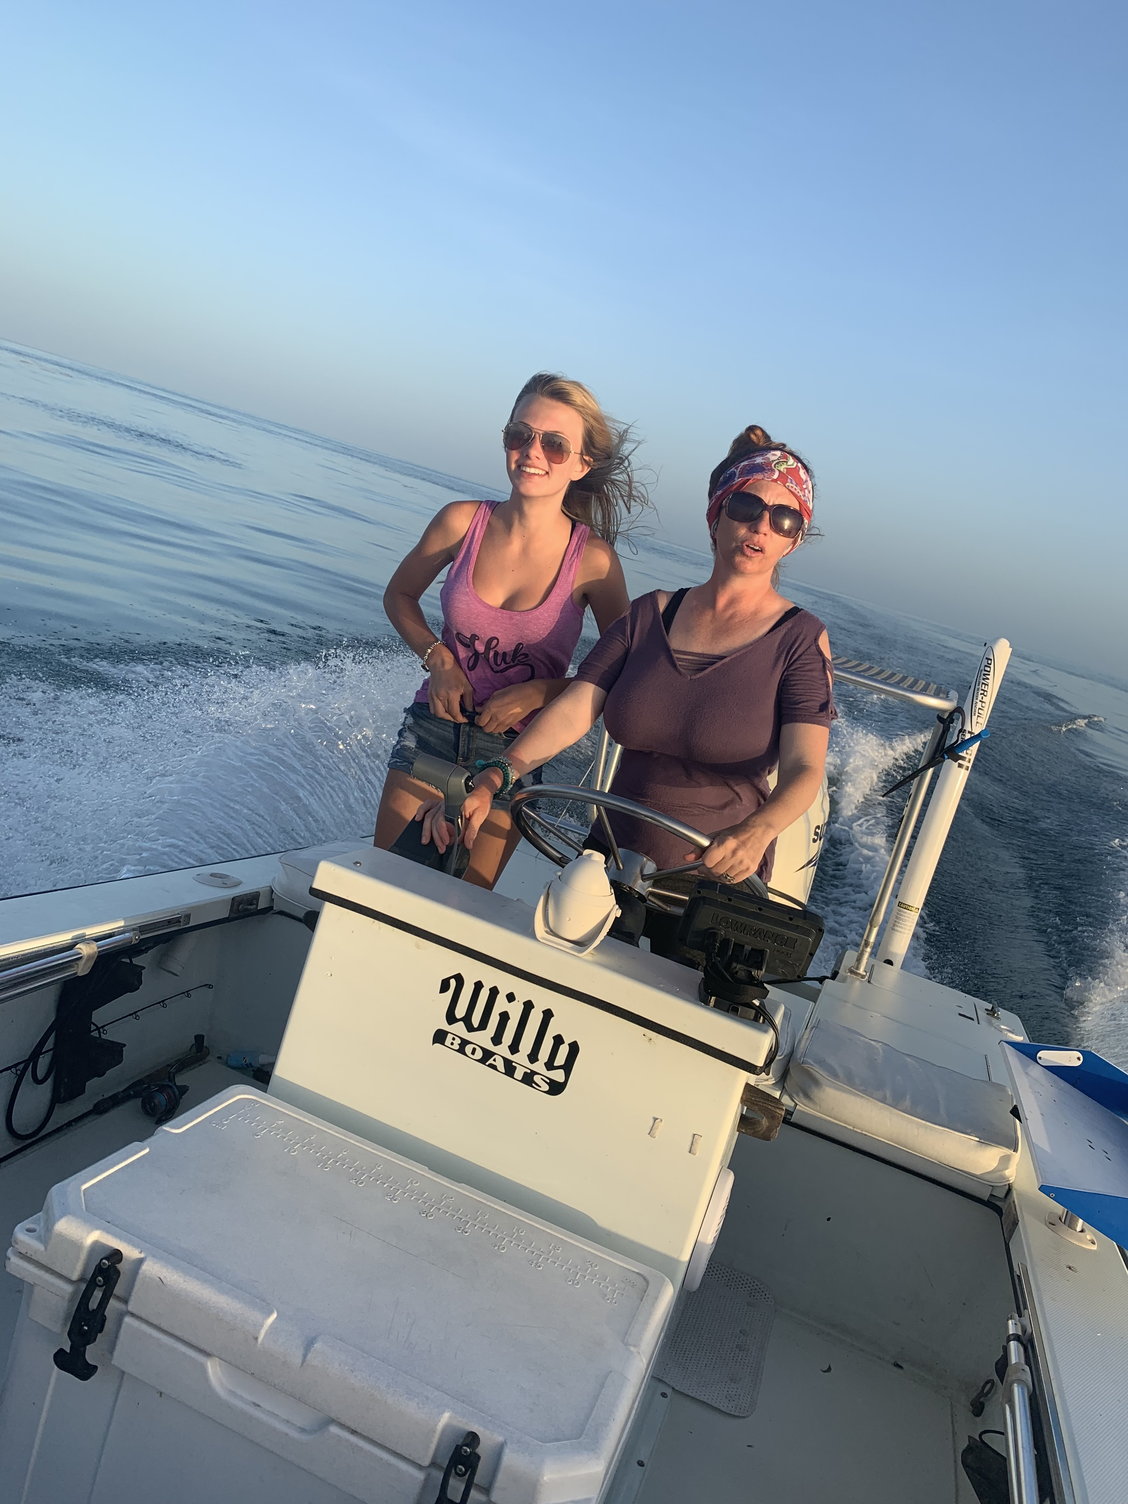 Post the best picture of your lady on your boat - Pa picture